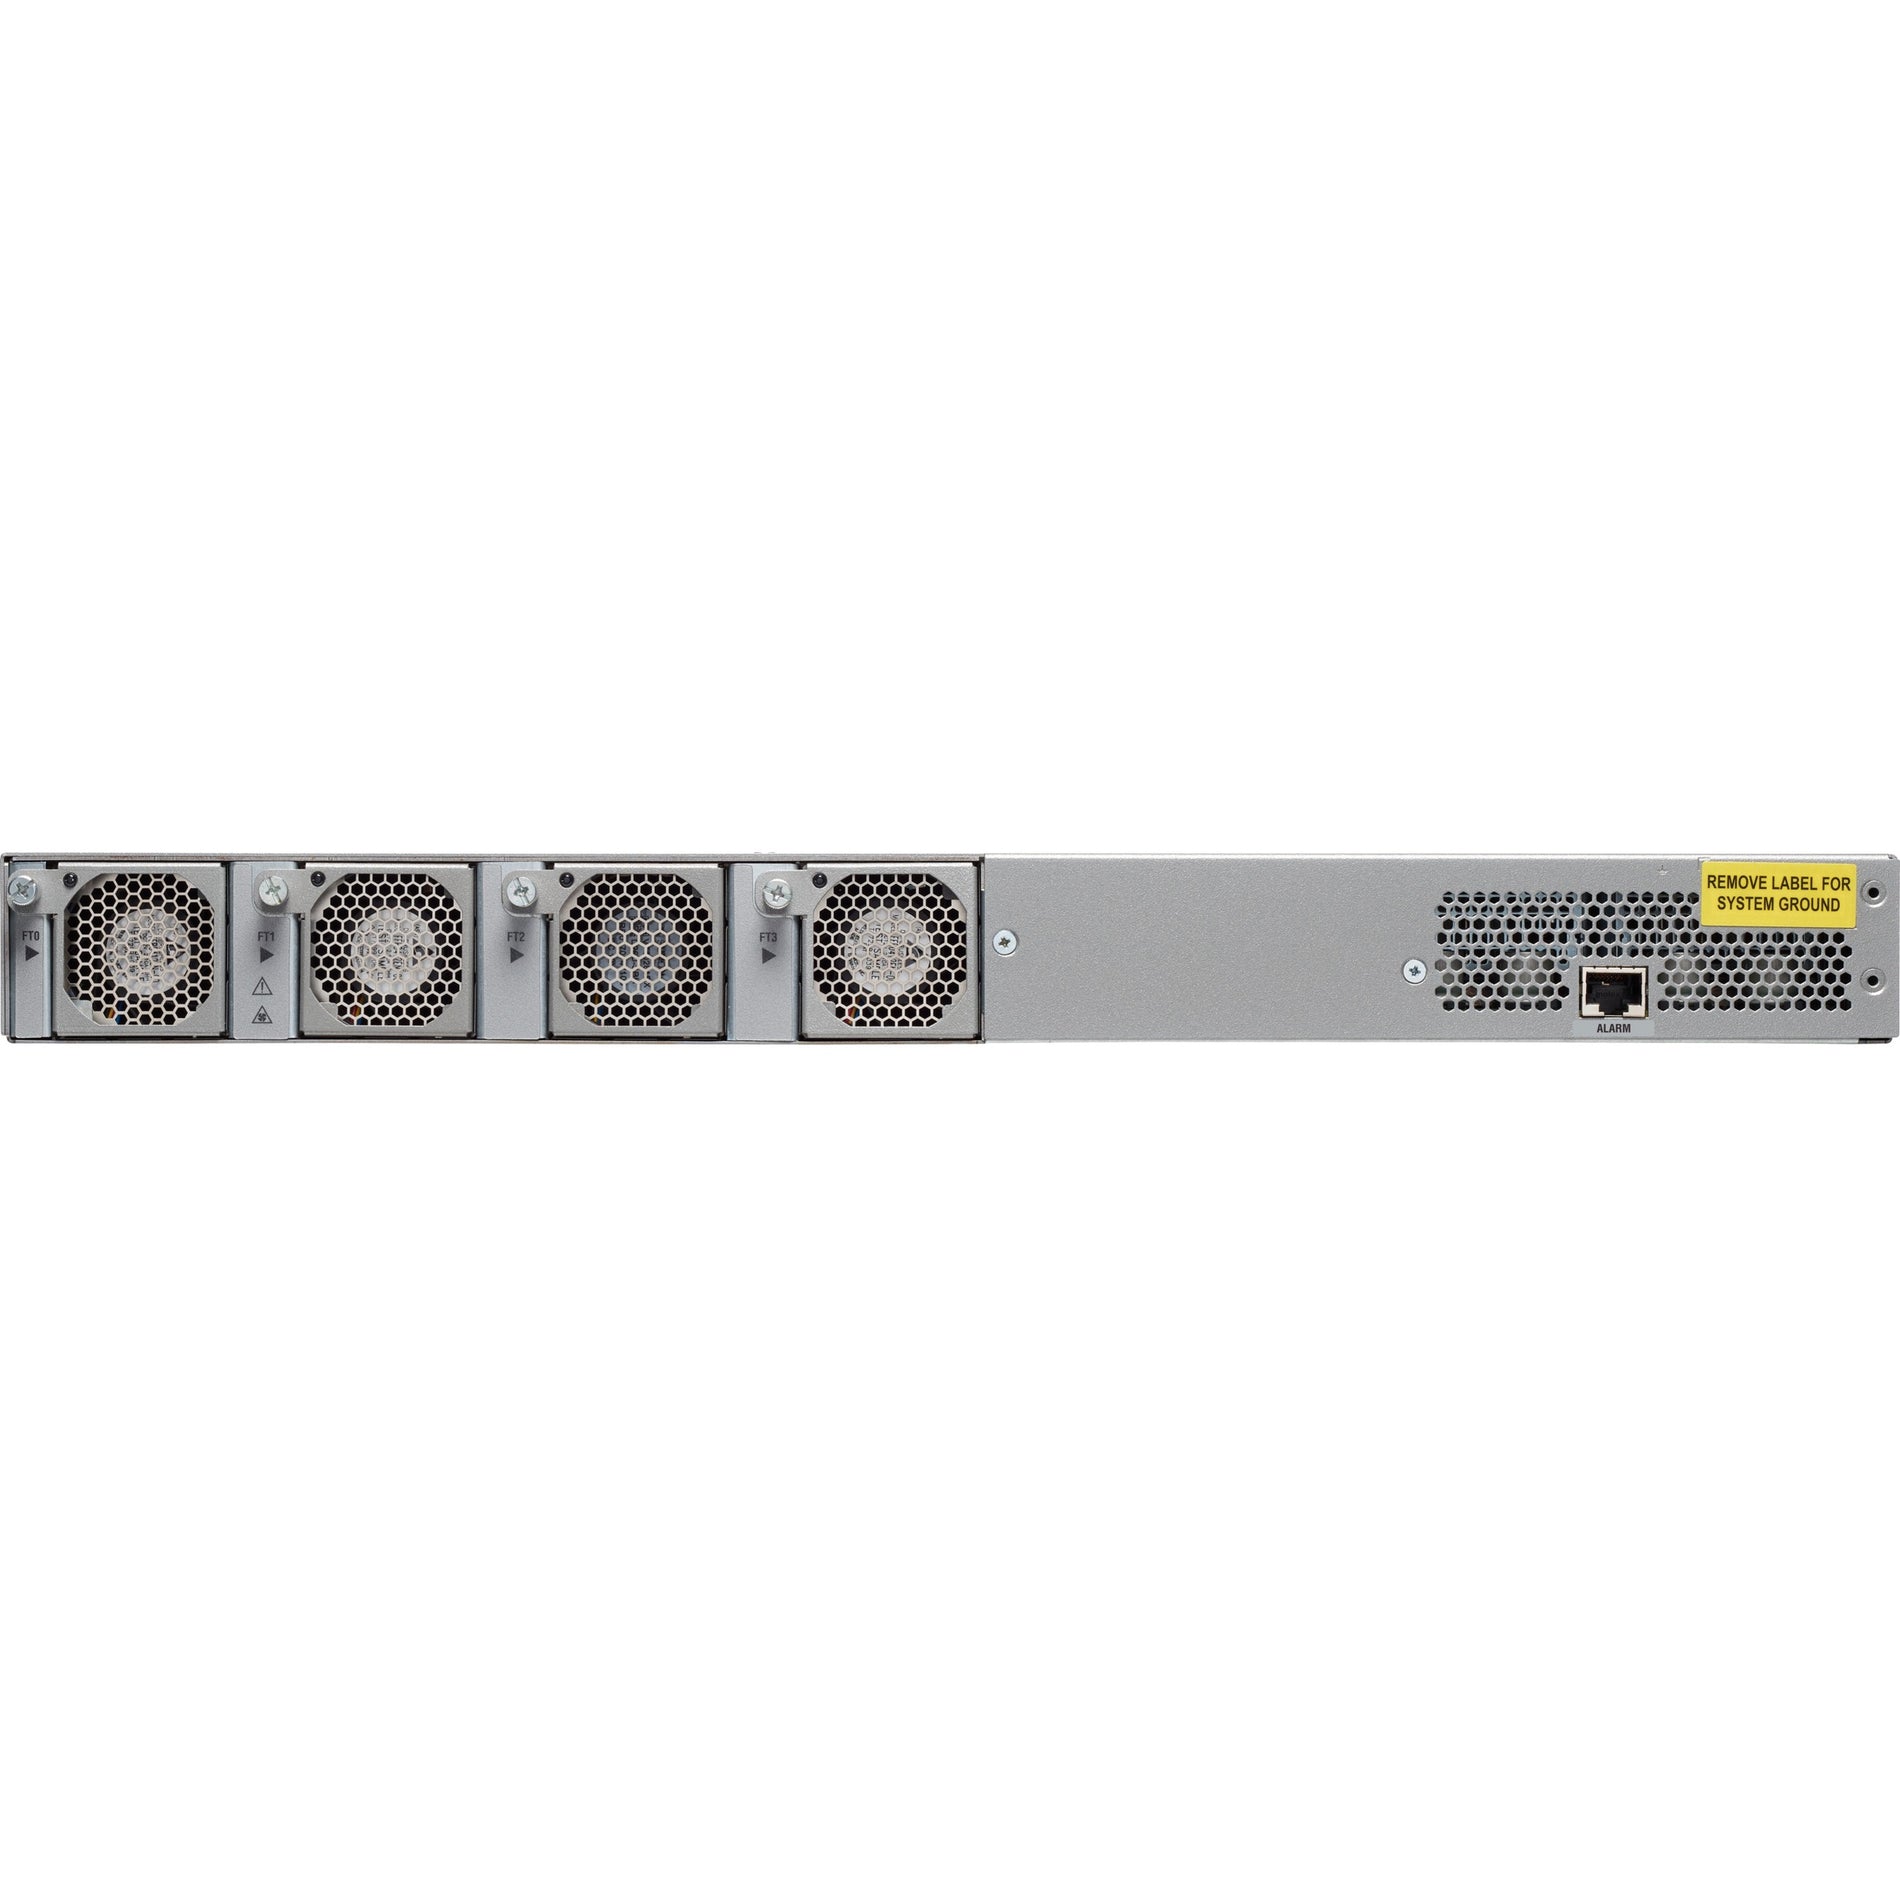 Cisco 540 Router Chassis (N540-24Z8Q2C-M)